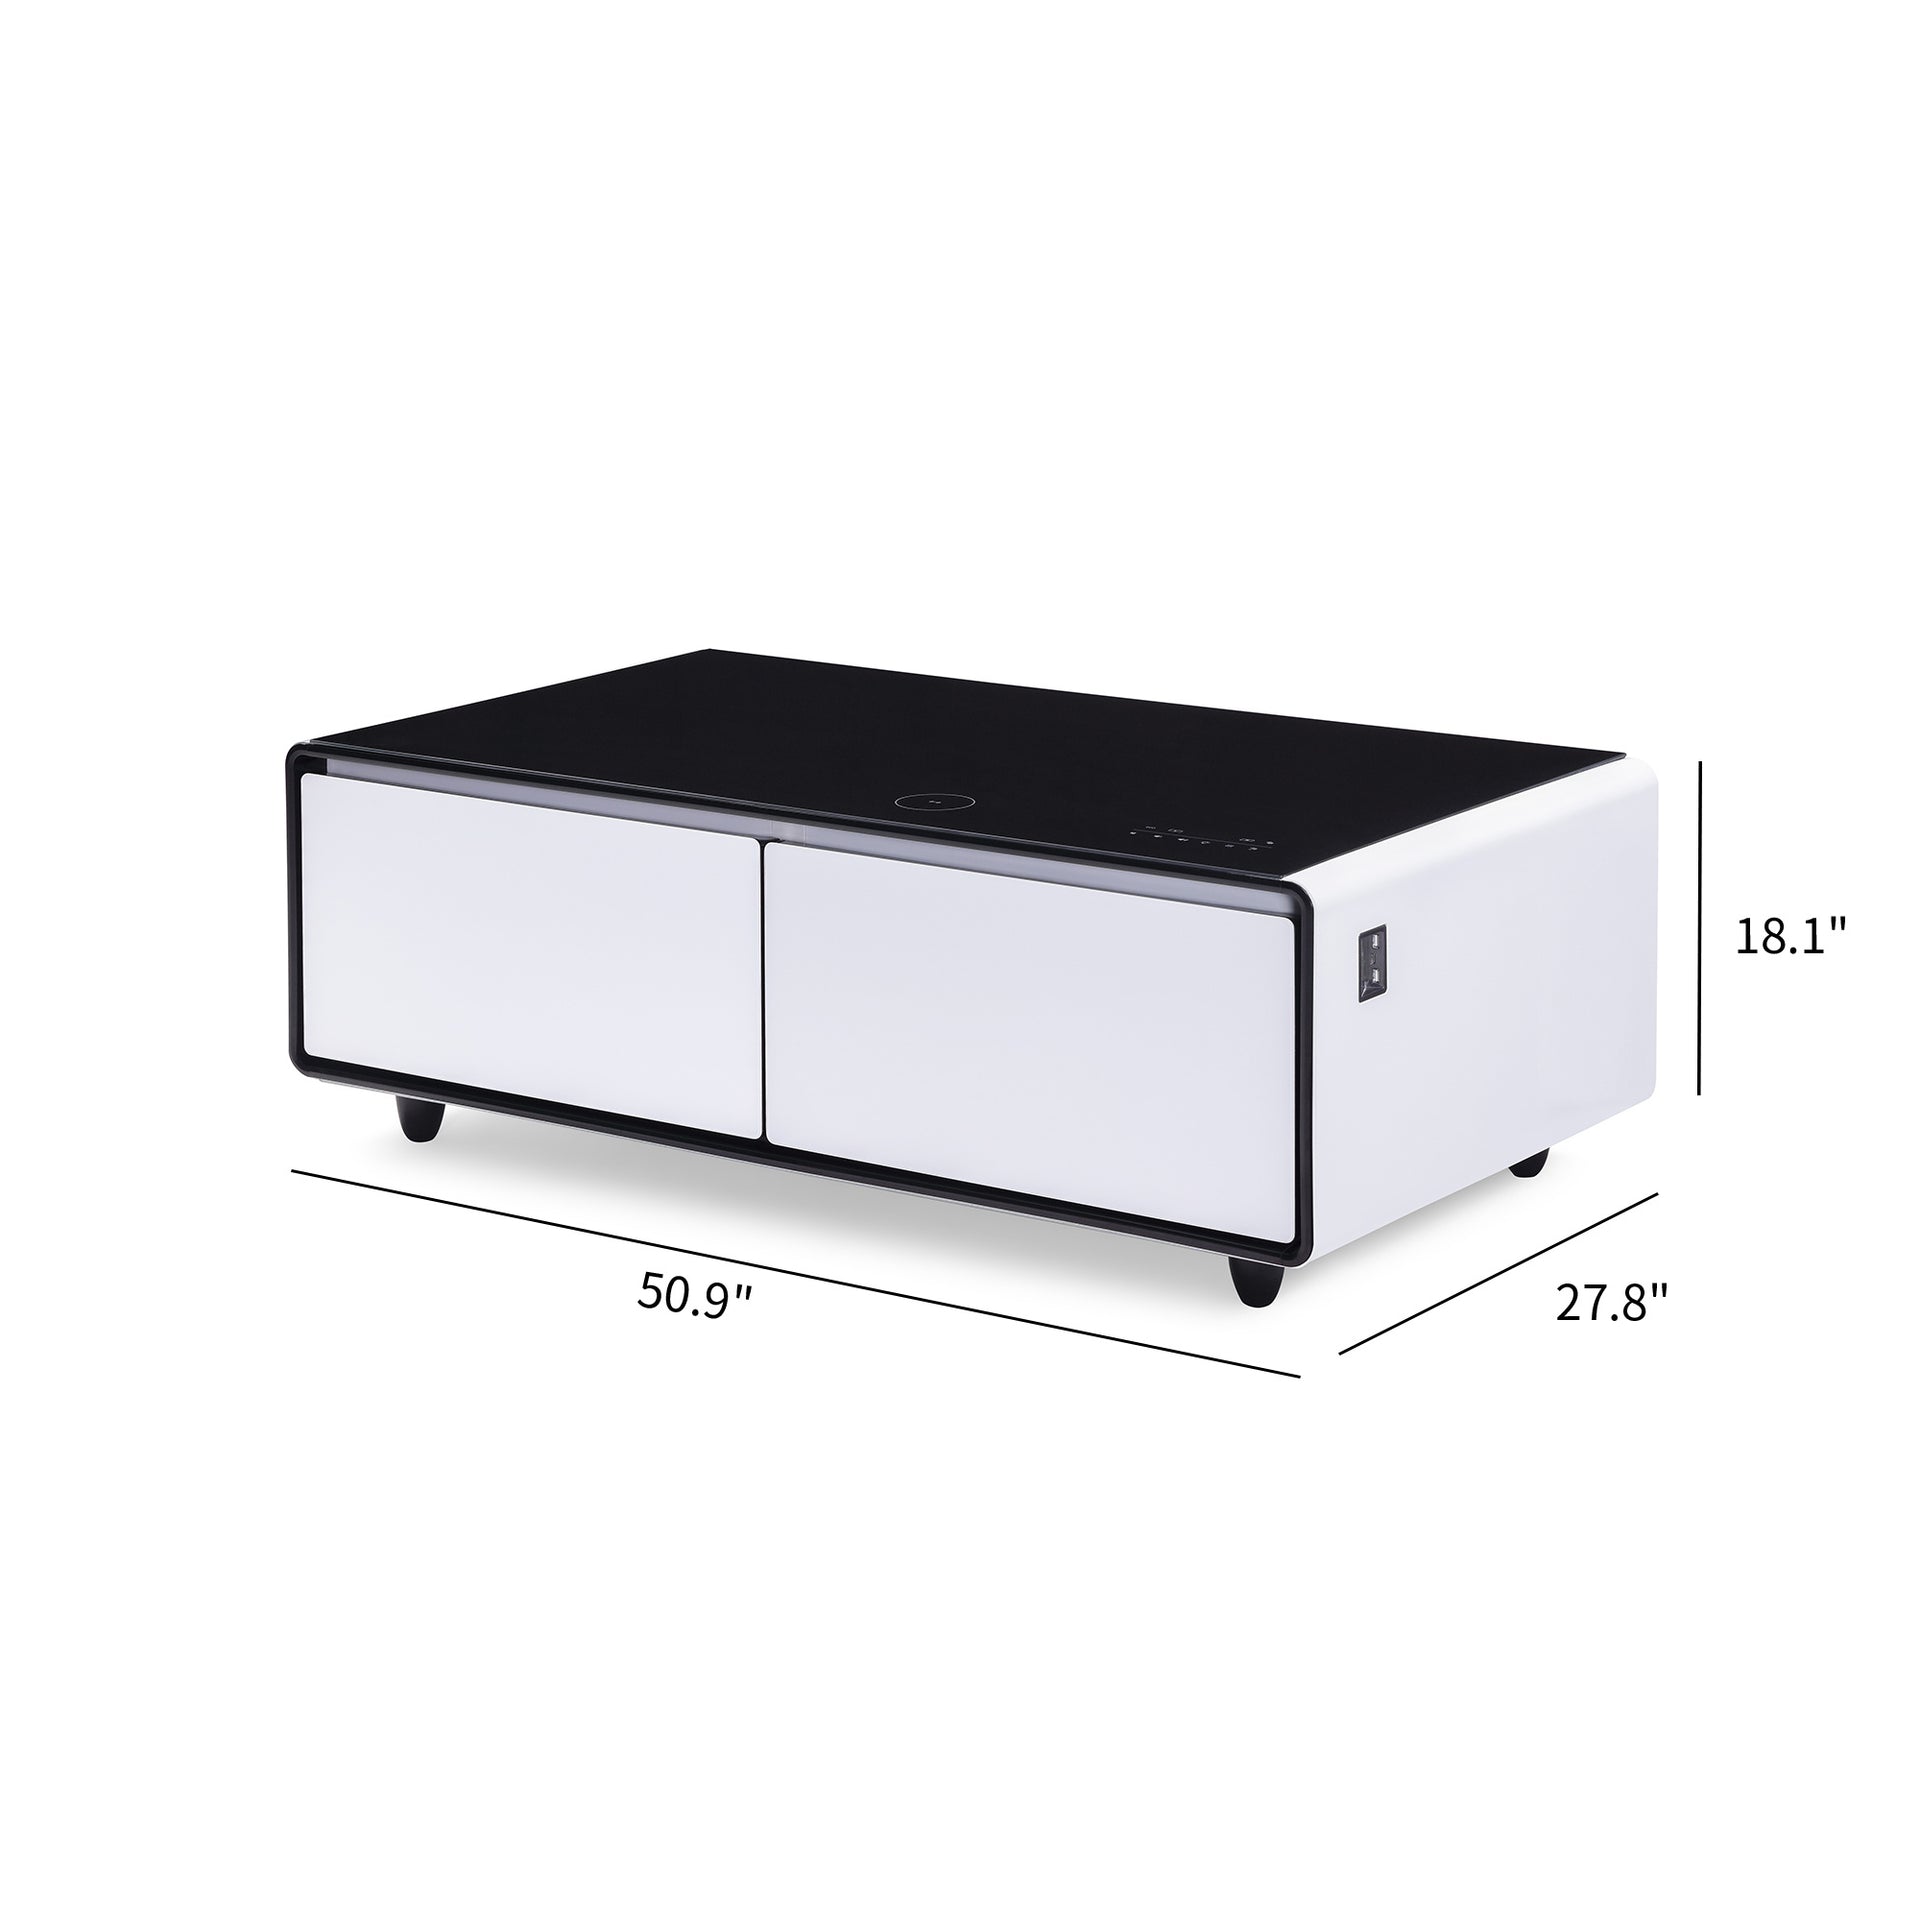 Modern Smart Coffee Table with Built-in Fridge, Wireless Charging and Bluetooth Speaker, White